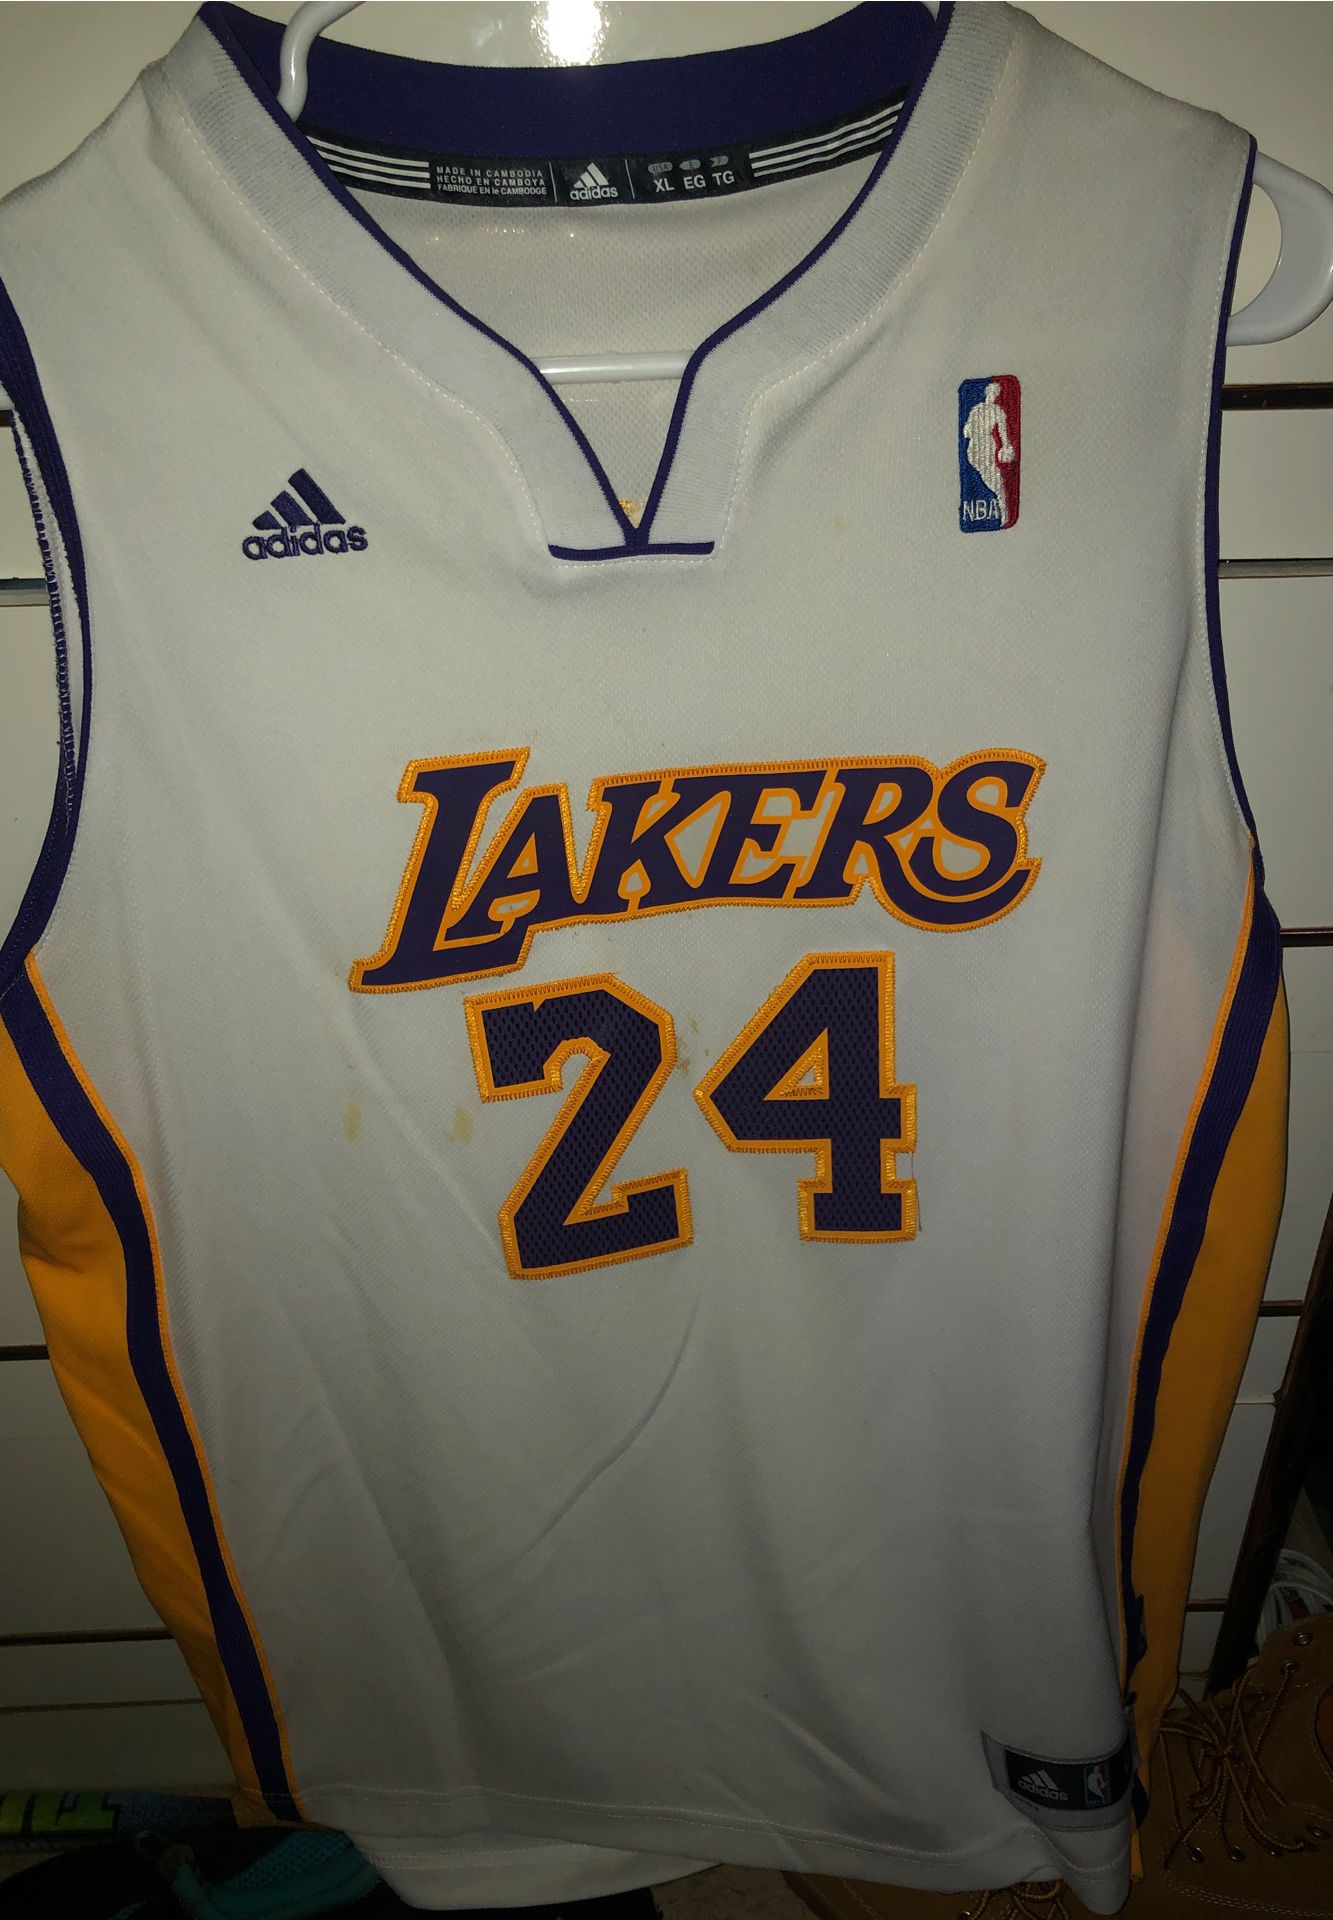 Kobe Bryant #24 NEW LA Lakers Classic Edition Basketball Vaporknit Jersey  size Medium (44) for Sale in Downey, CA - OfferUp